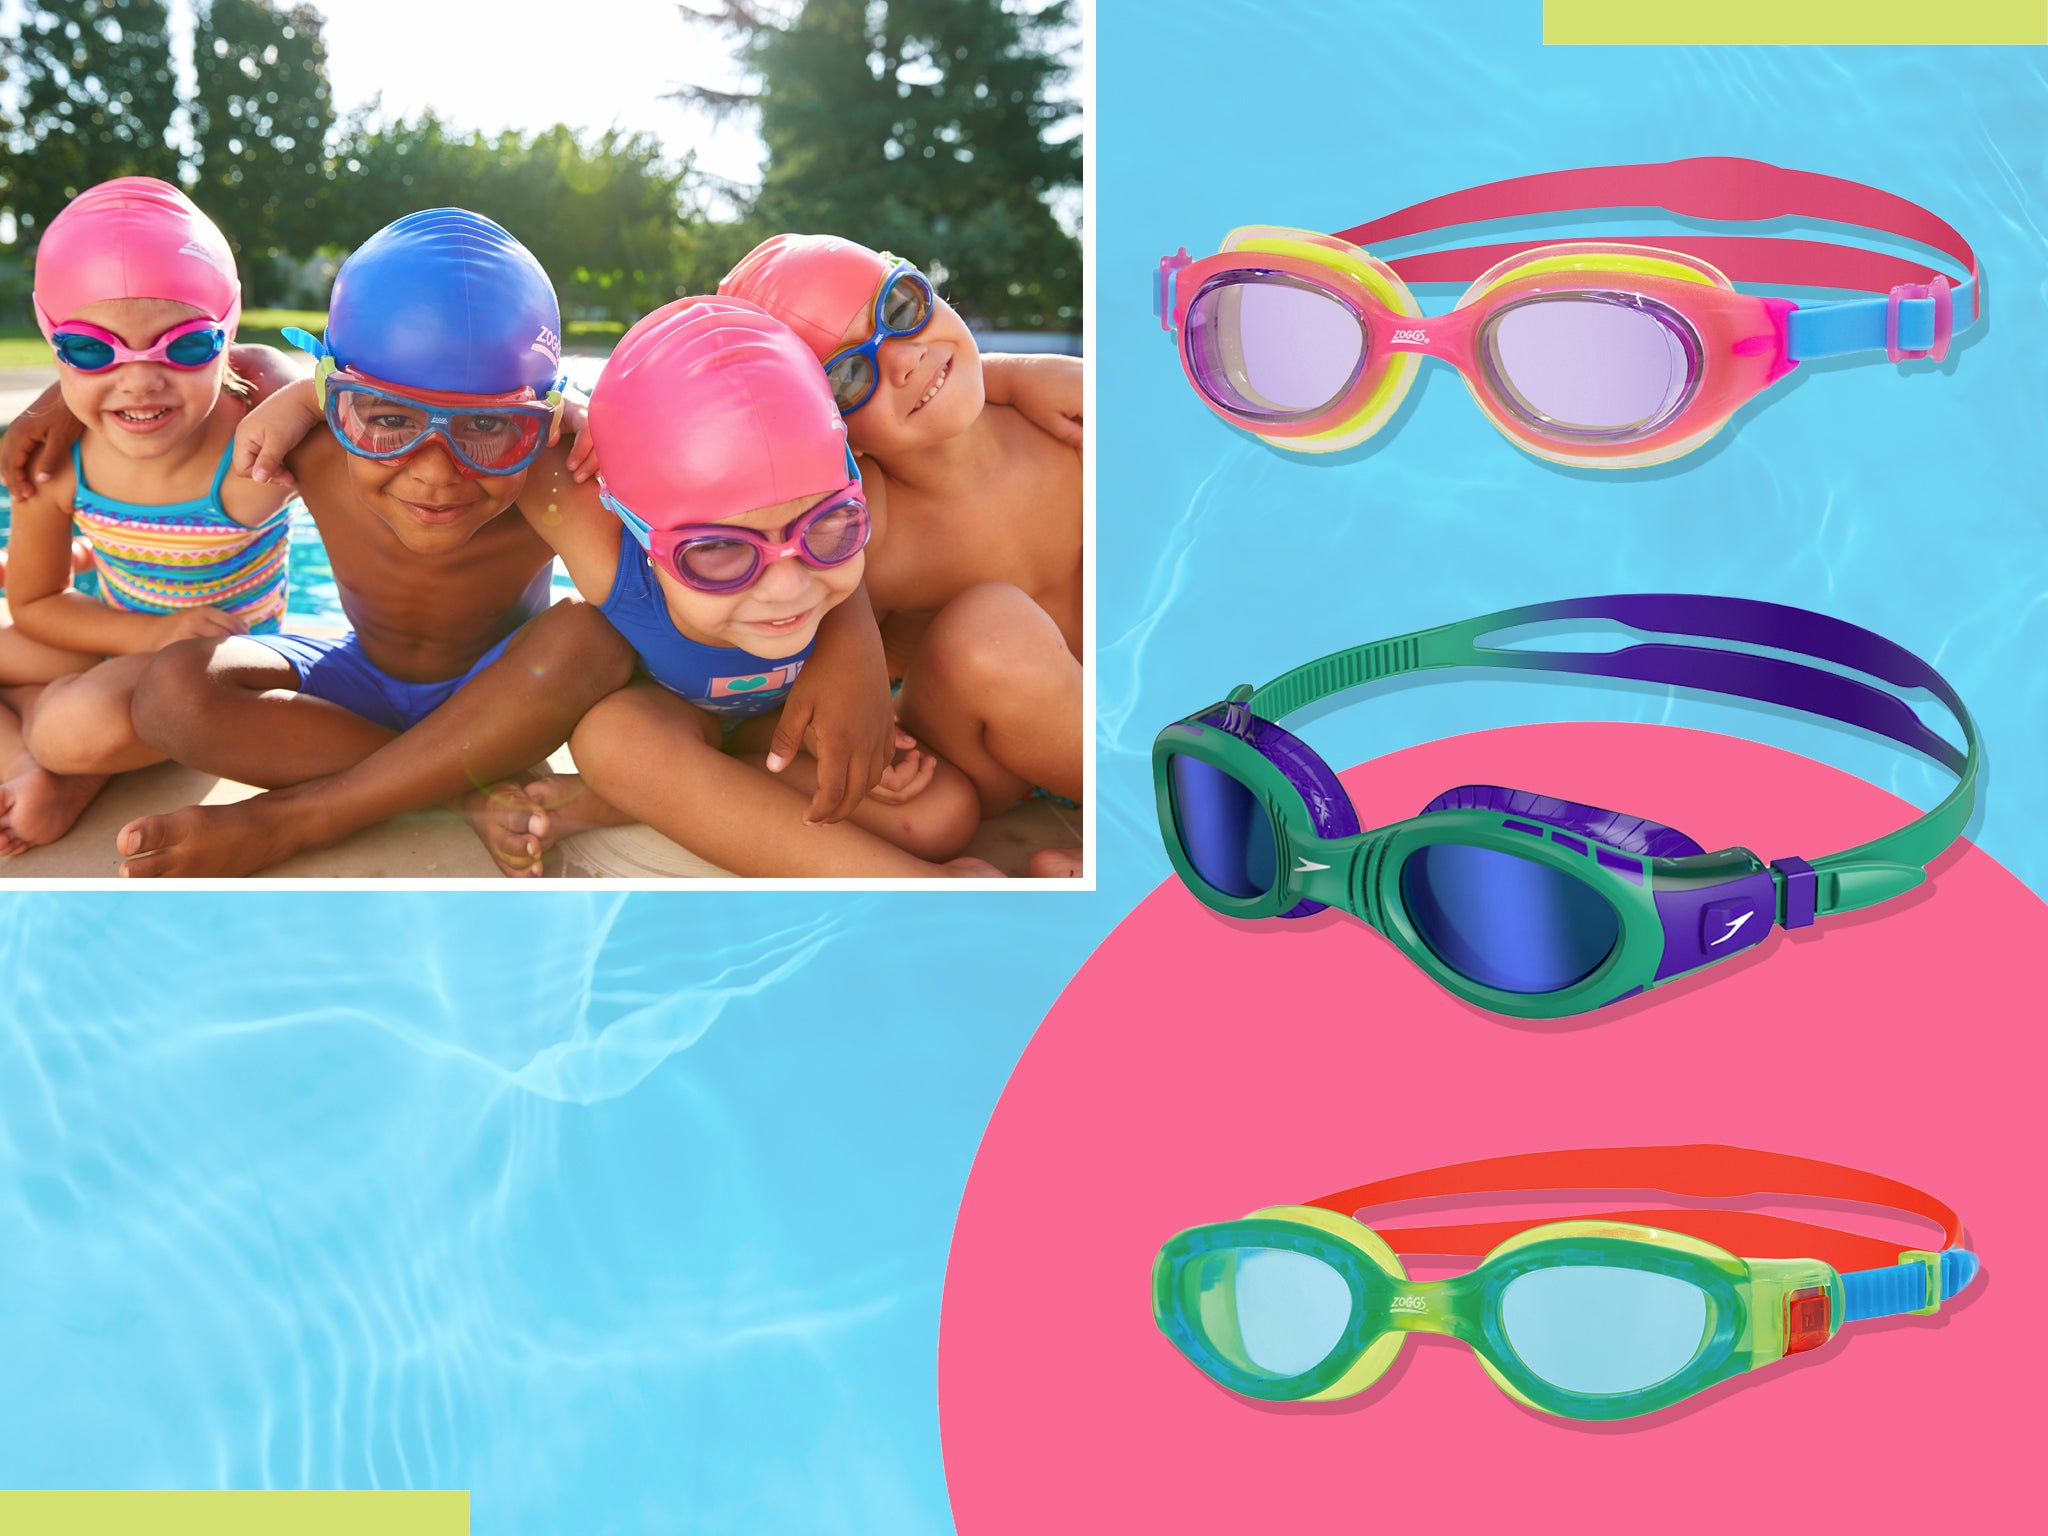 Kids Swimming Goggles Age 6-14 for Children Toddlers Boys Girls,Large Frame Swim Goggles Anti Fog UV Protection No Leaking with Nose Clip Earplugs Swim Cap for Indoor Outdoor